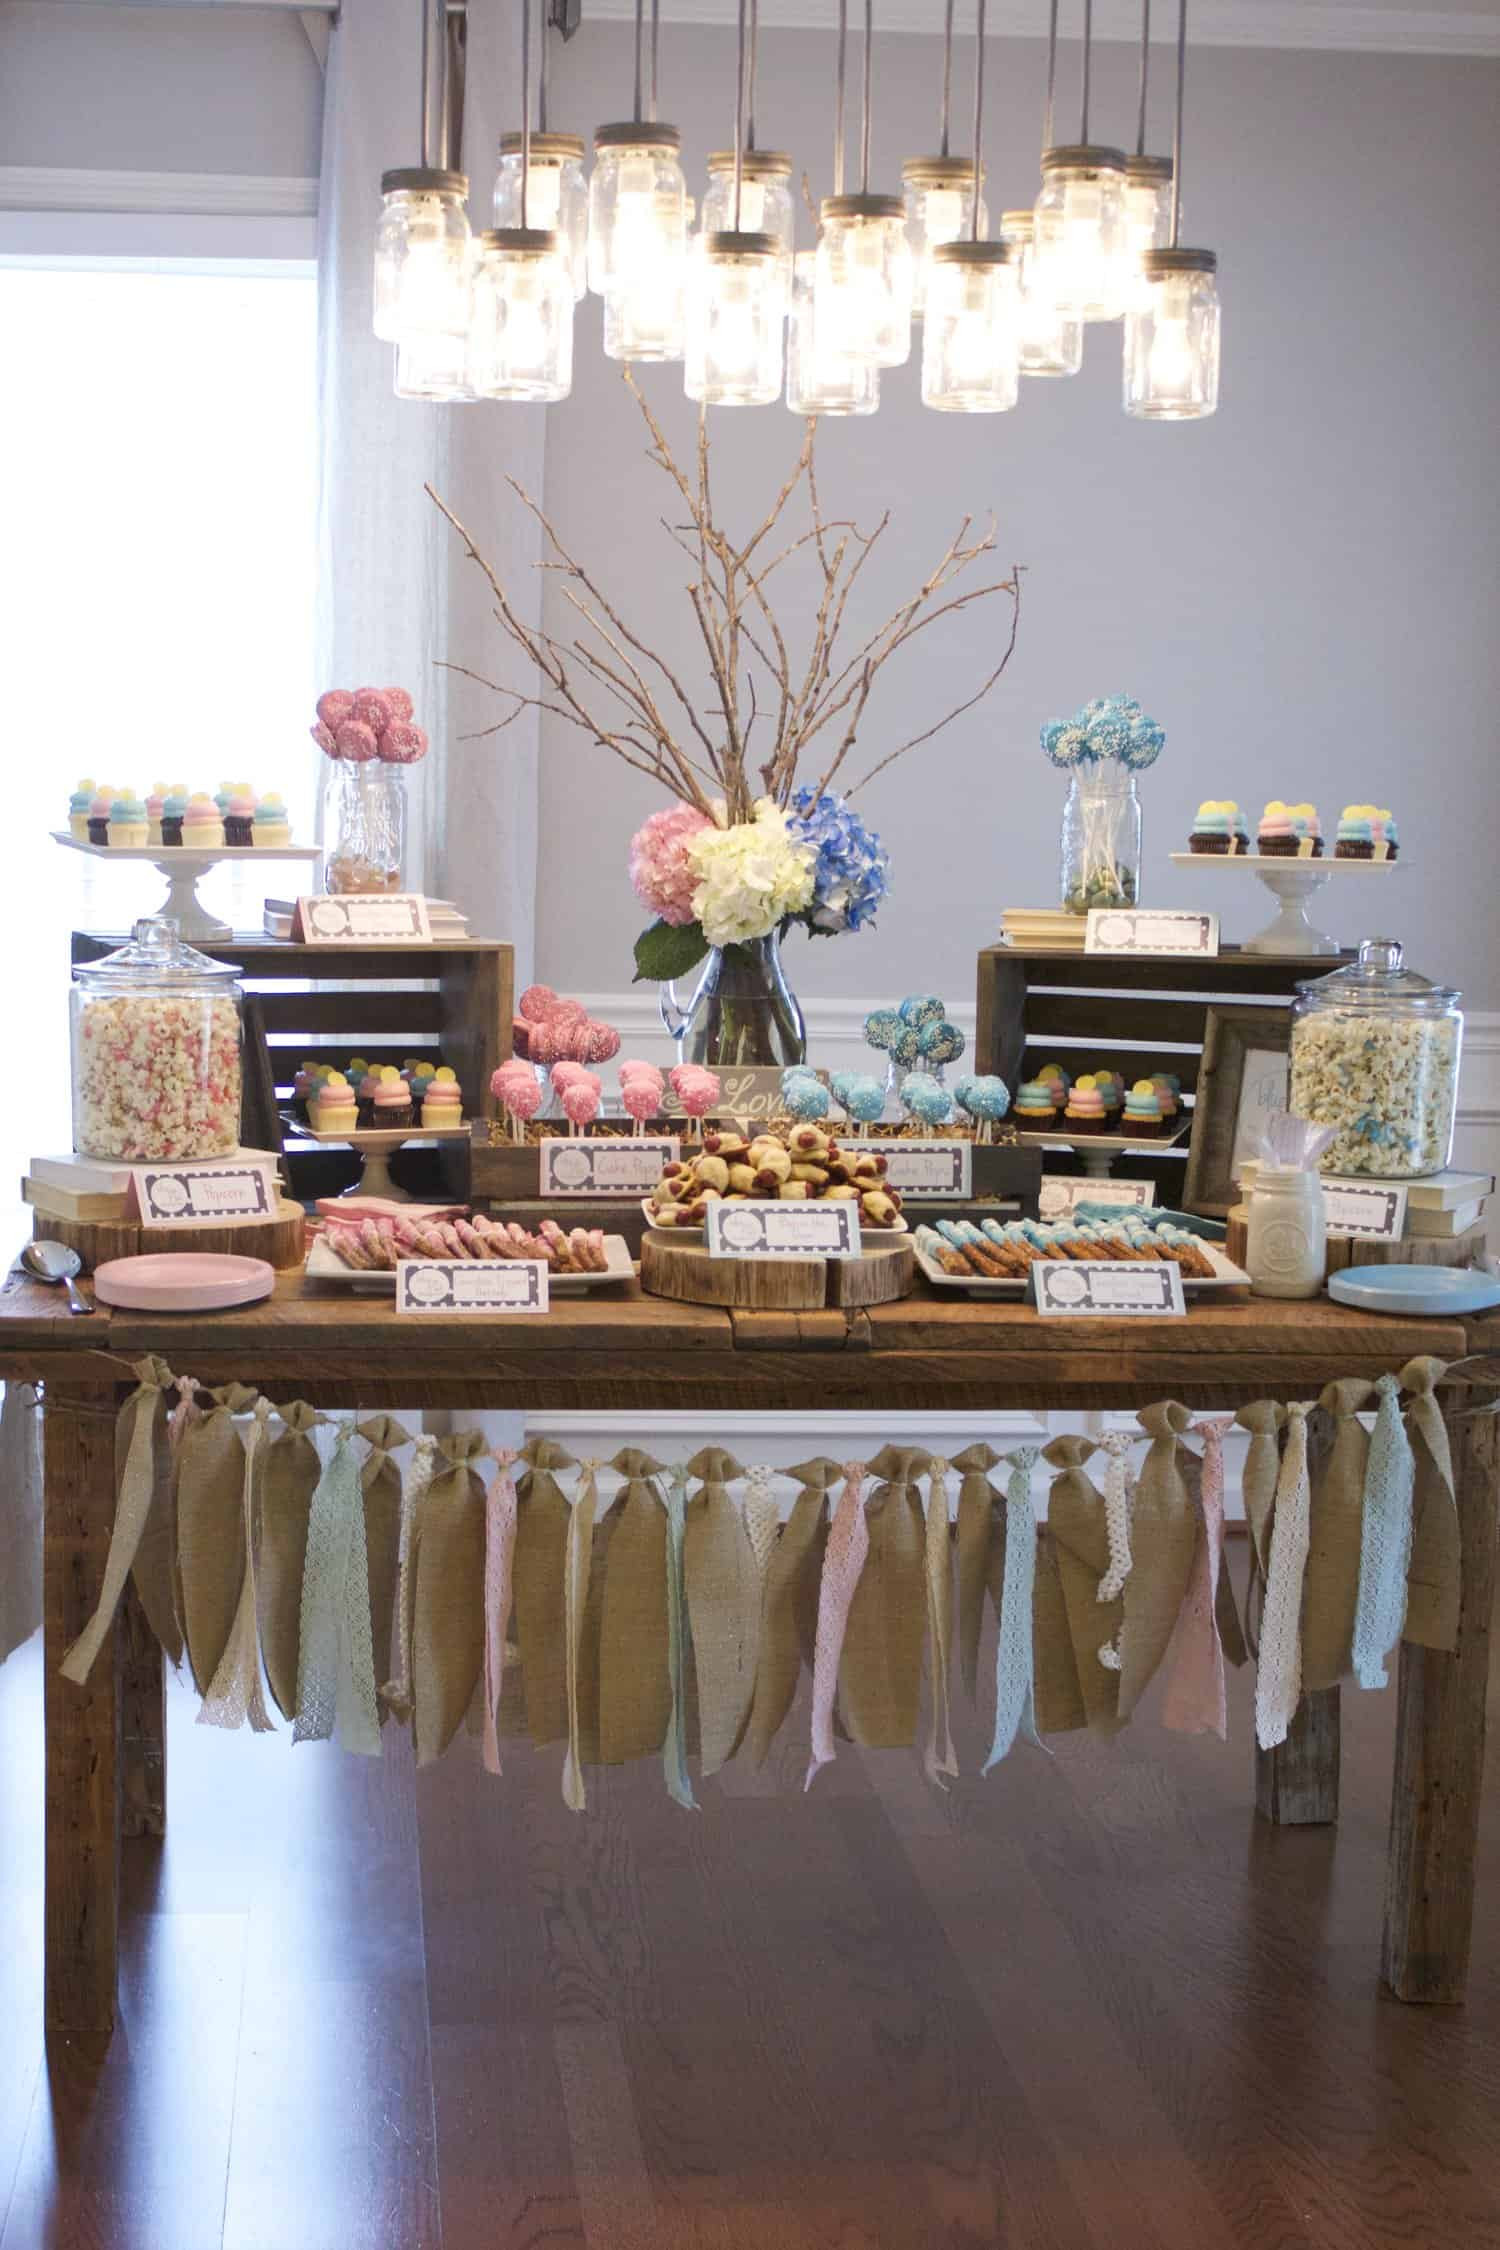 Decoration Ideas For Gender Reveal Party
 17 Tips To Throw An Unfor table Gender Reveal Party